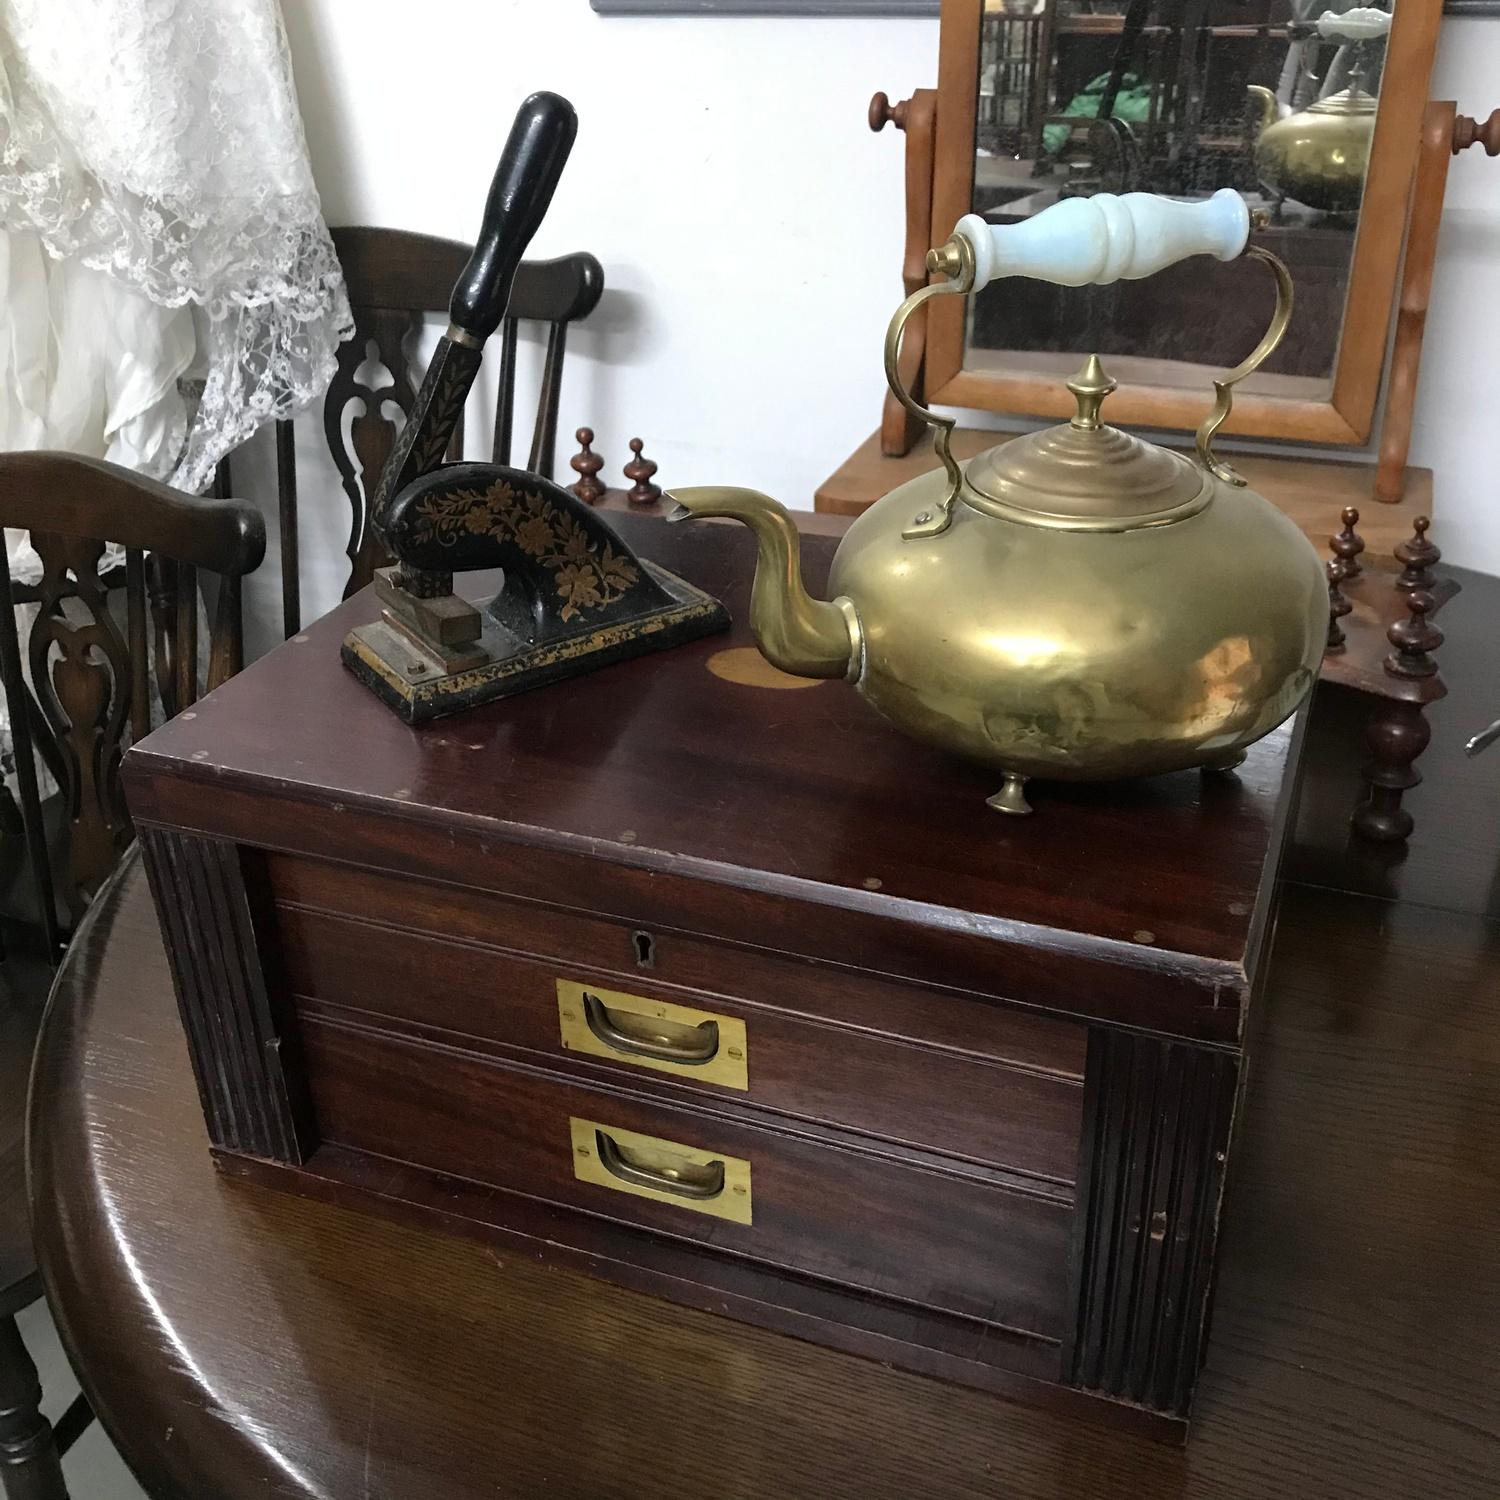 A Victorian mahogany canteen chest, Brass kettle and Heavy ornate postal stamp/ press.